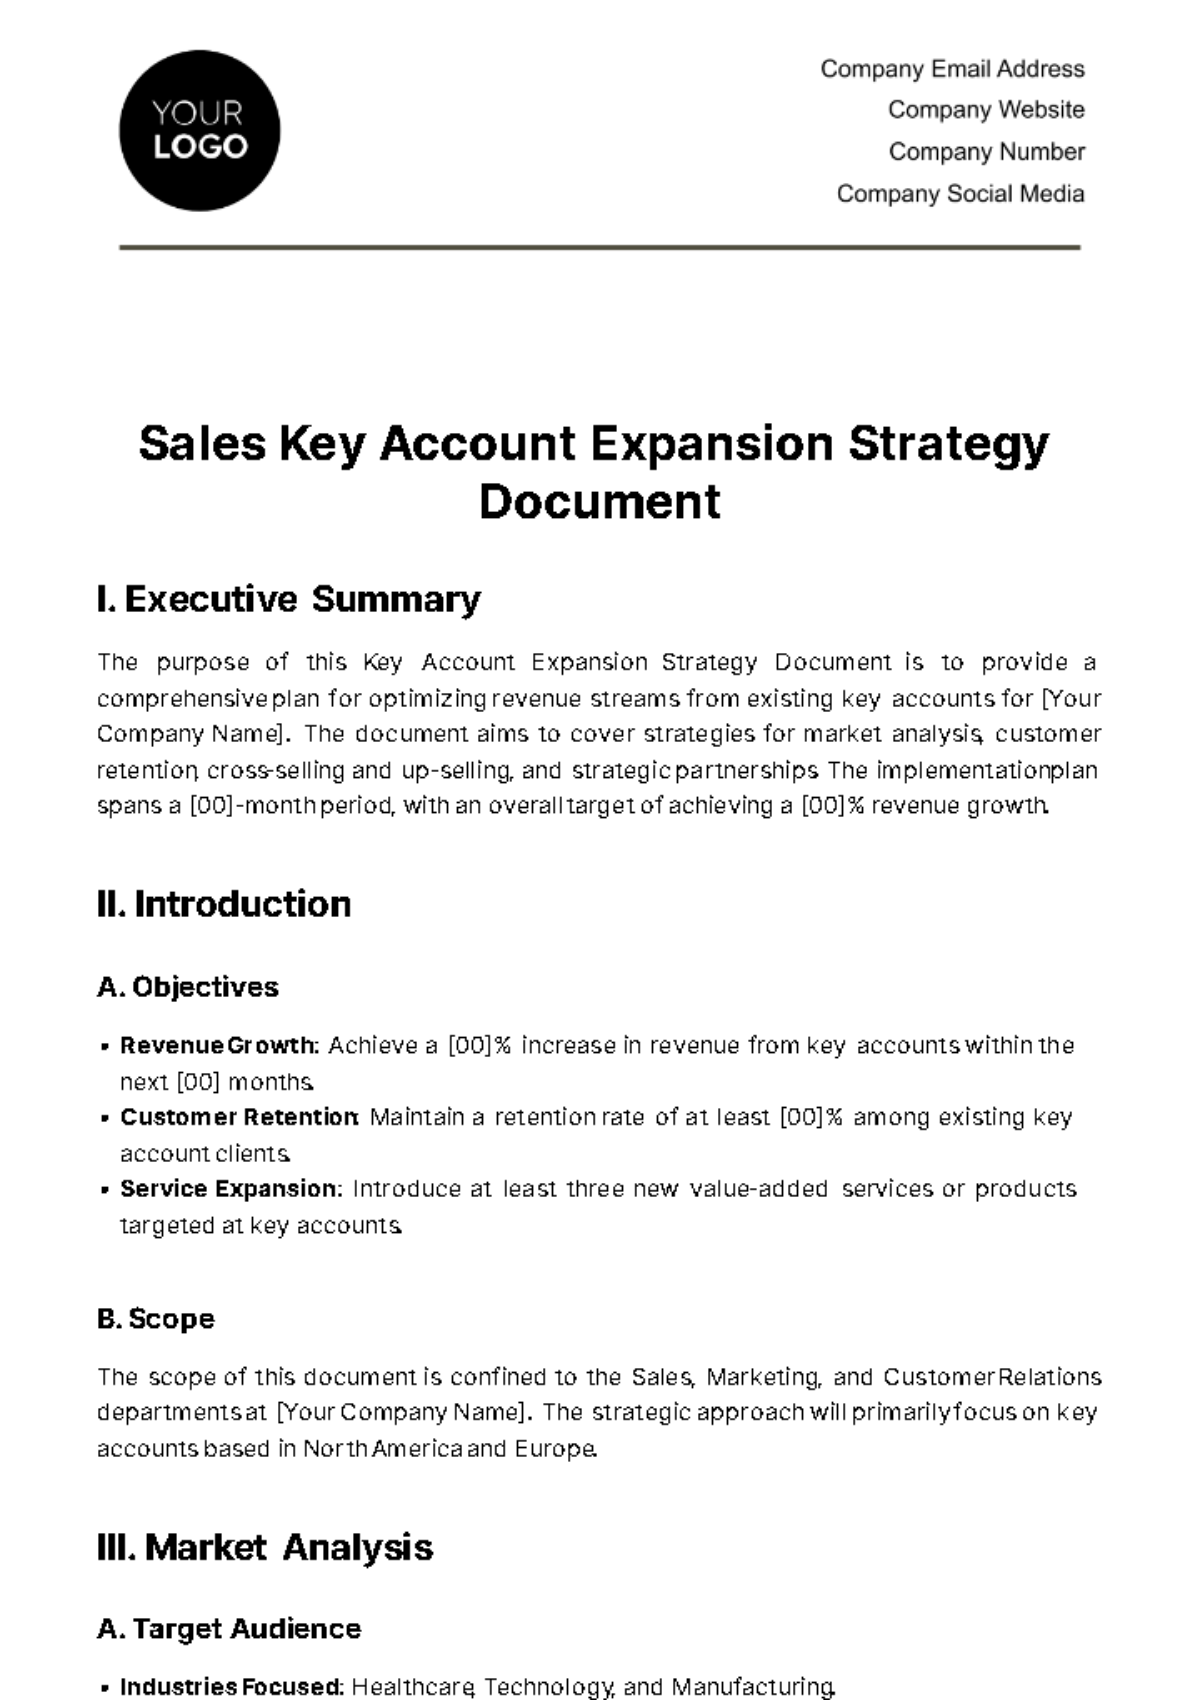 Free Sales Key Account Expansion Strategy Document Template